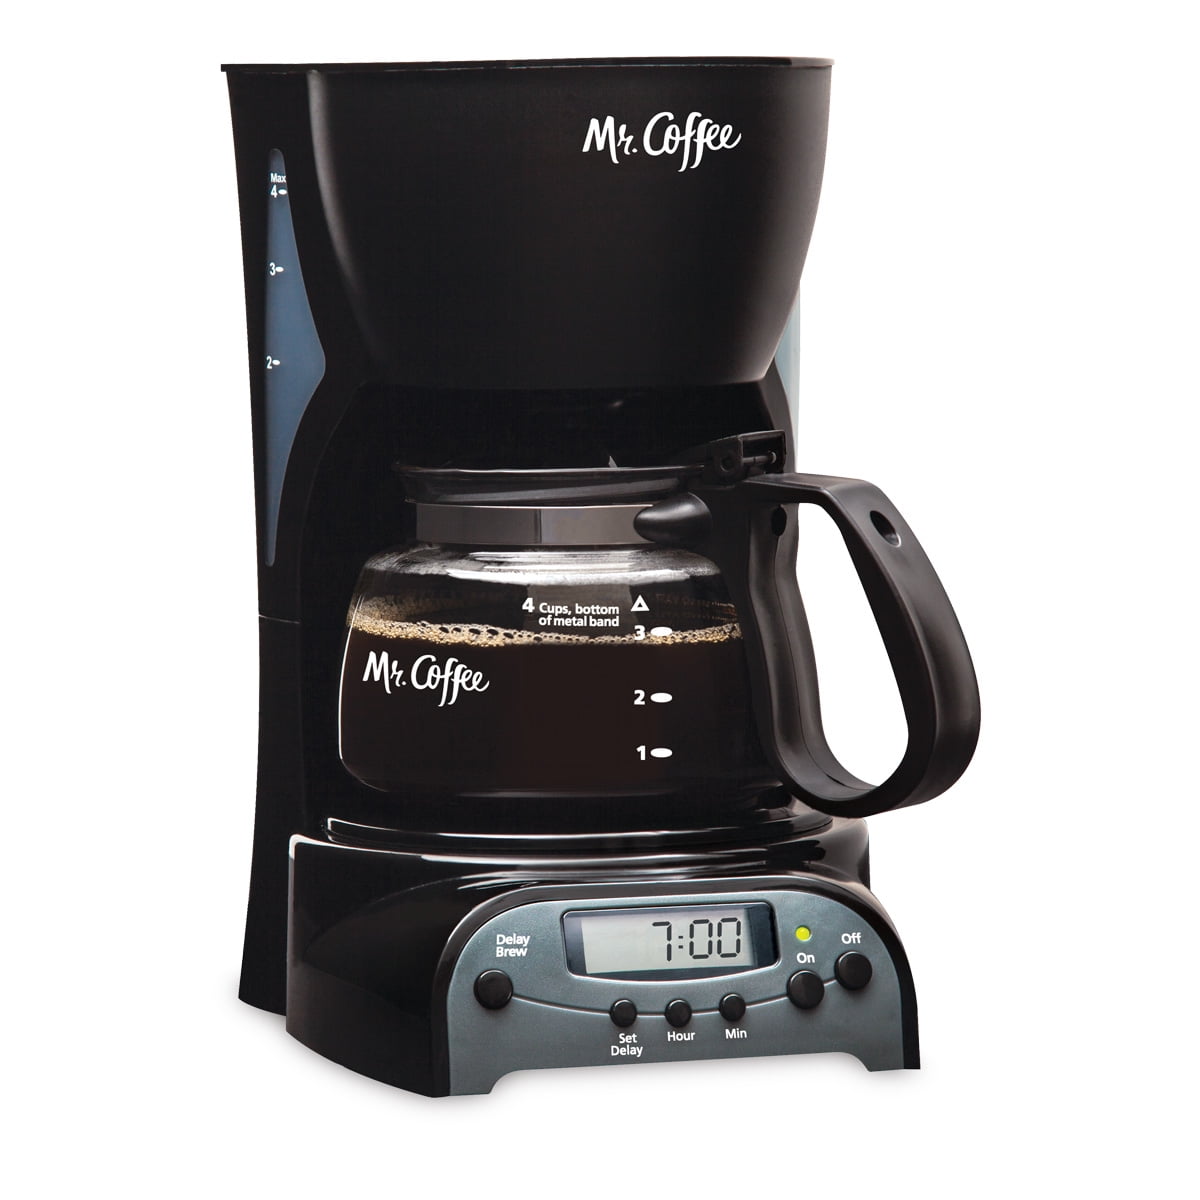 Mr. Coffee JR-4 4 Cup Automatic Drip Coffee Machine - White for